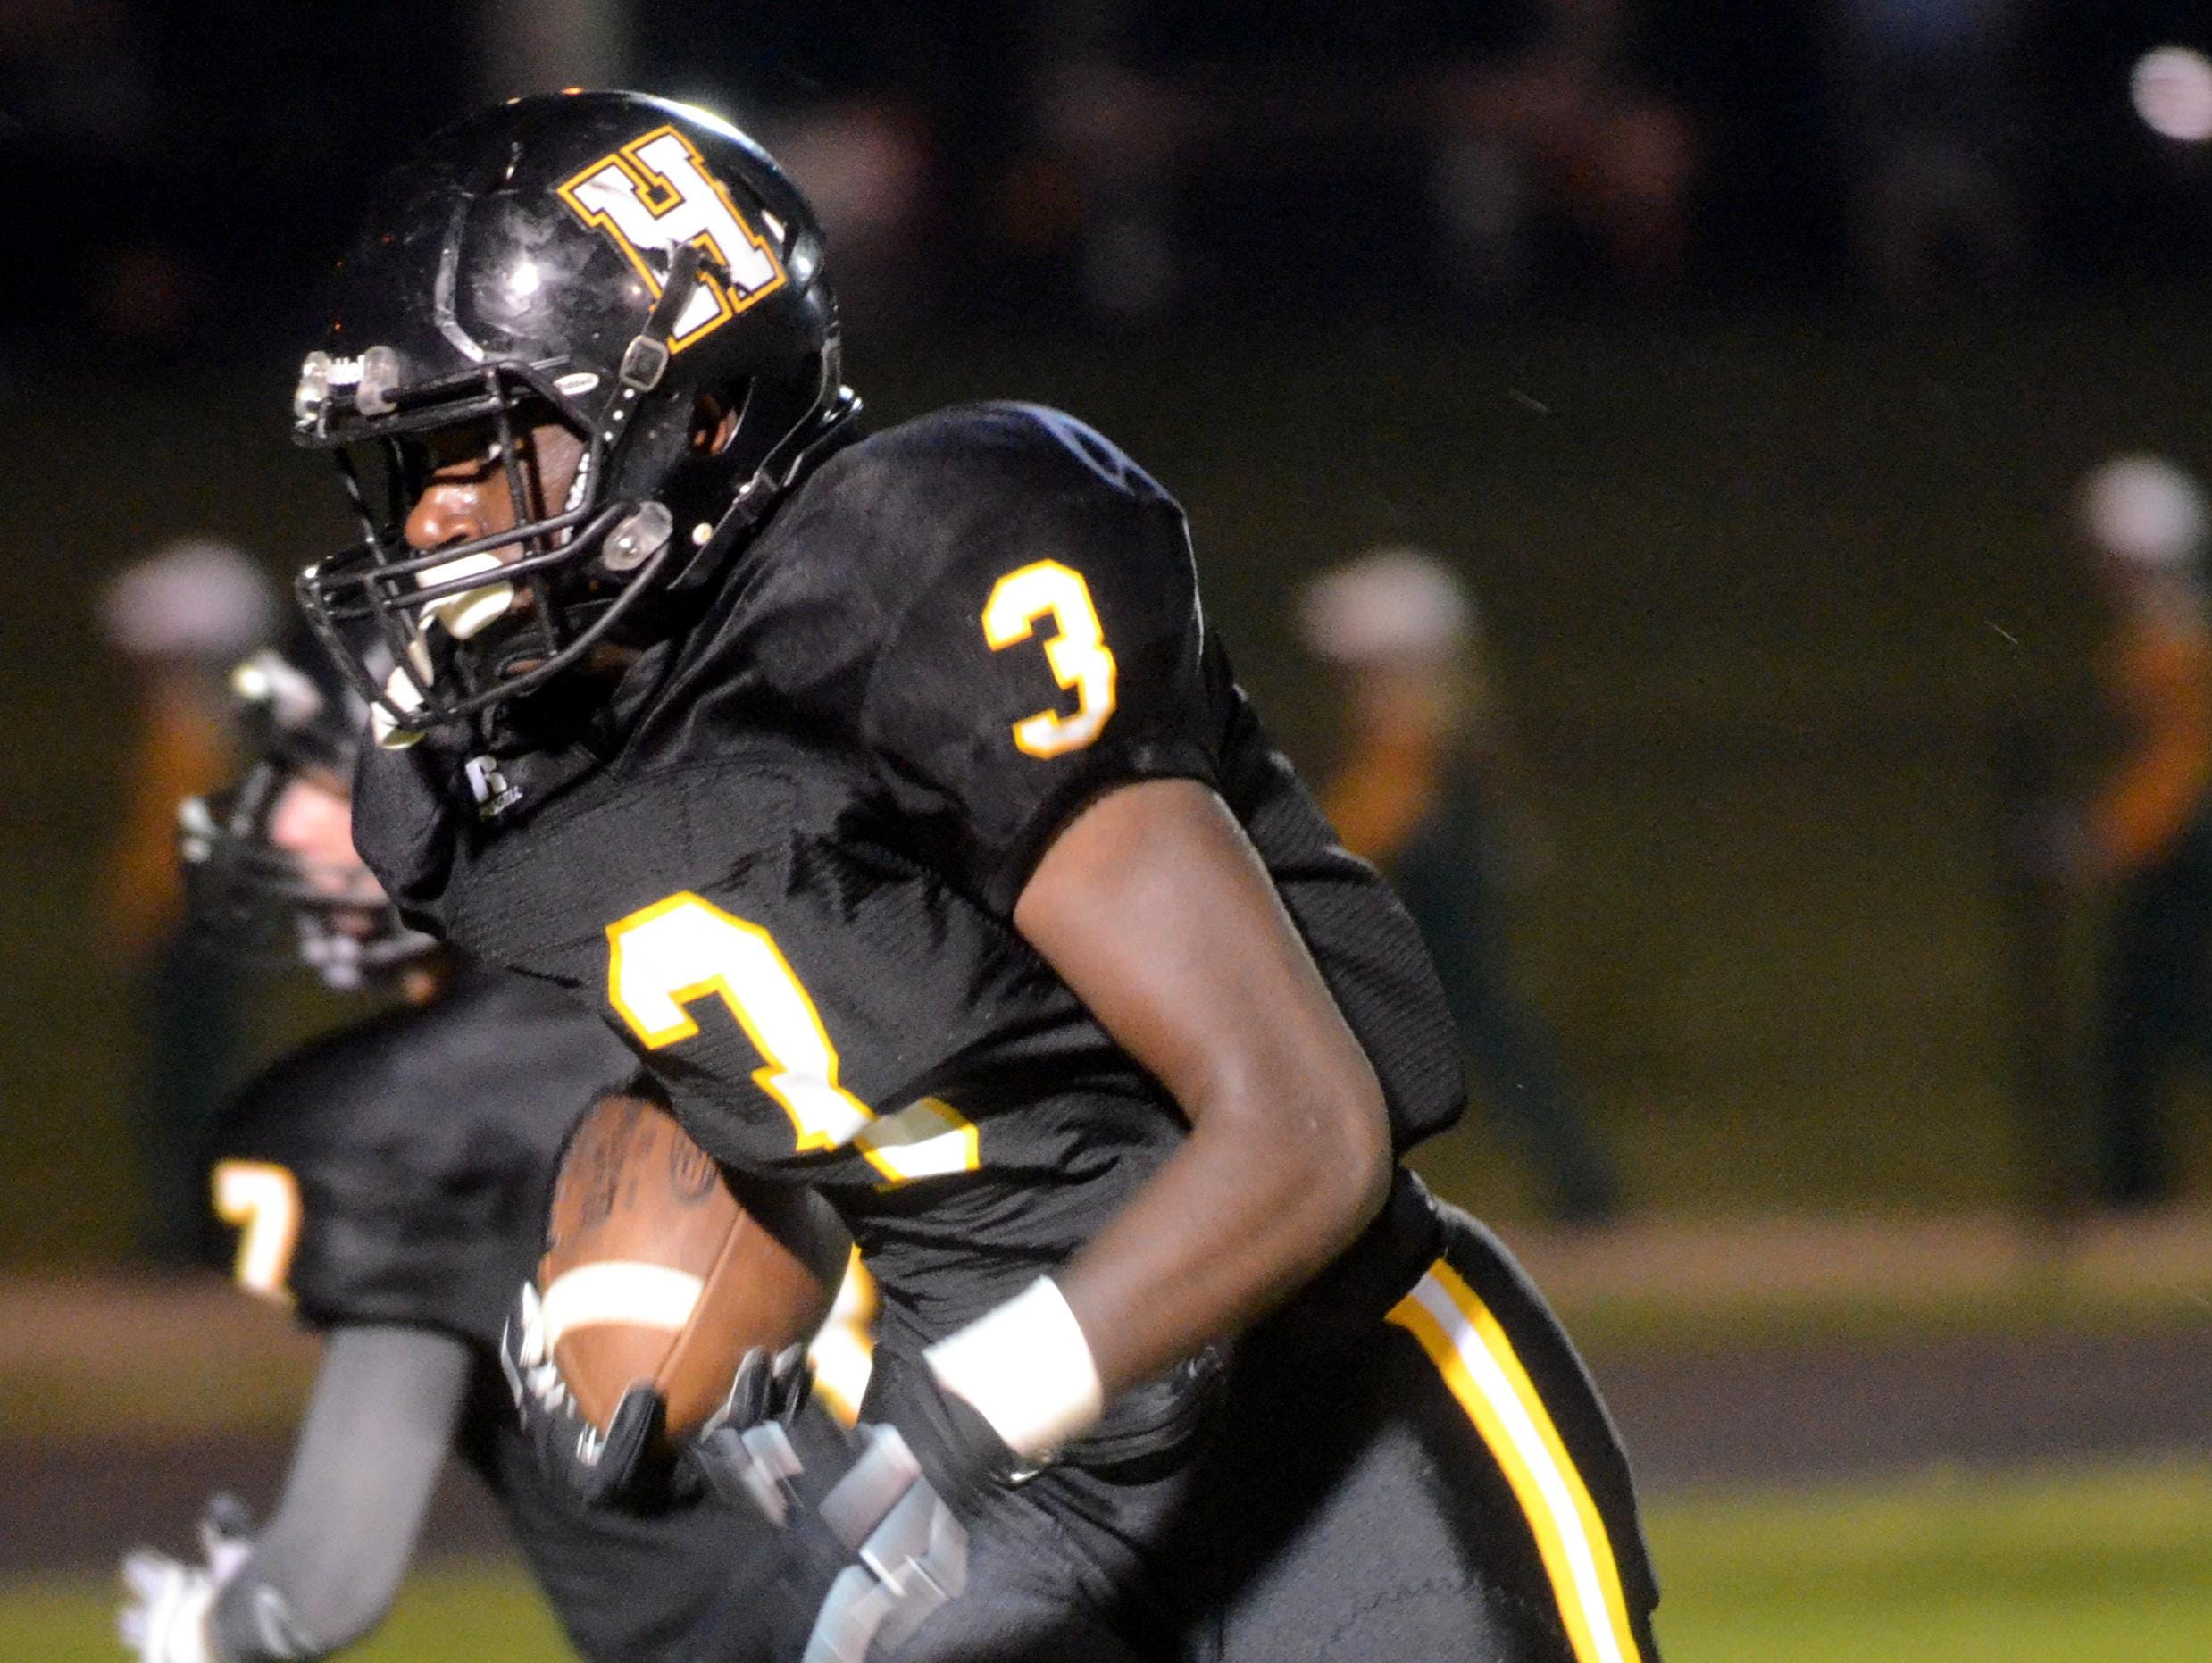 Hendersonville High sophomore Anthony Hughes had a 27-yard touchdown run during the second quarter.